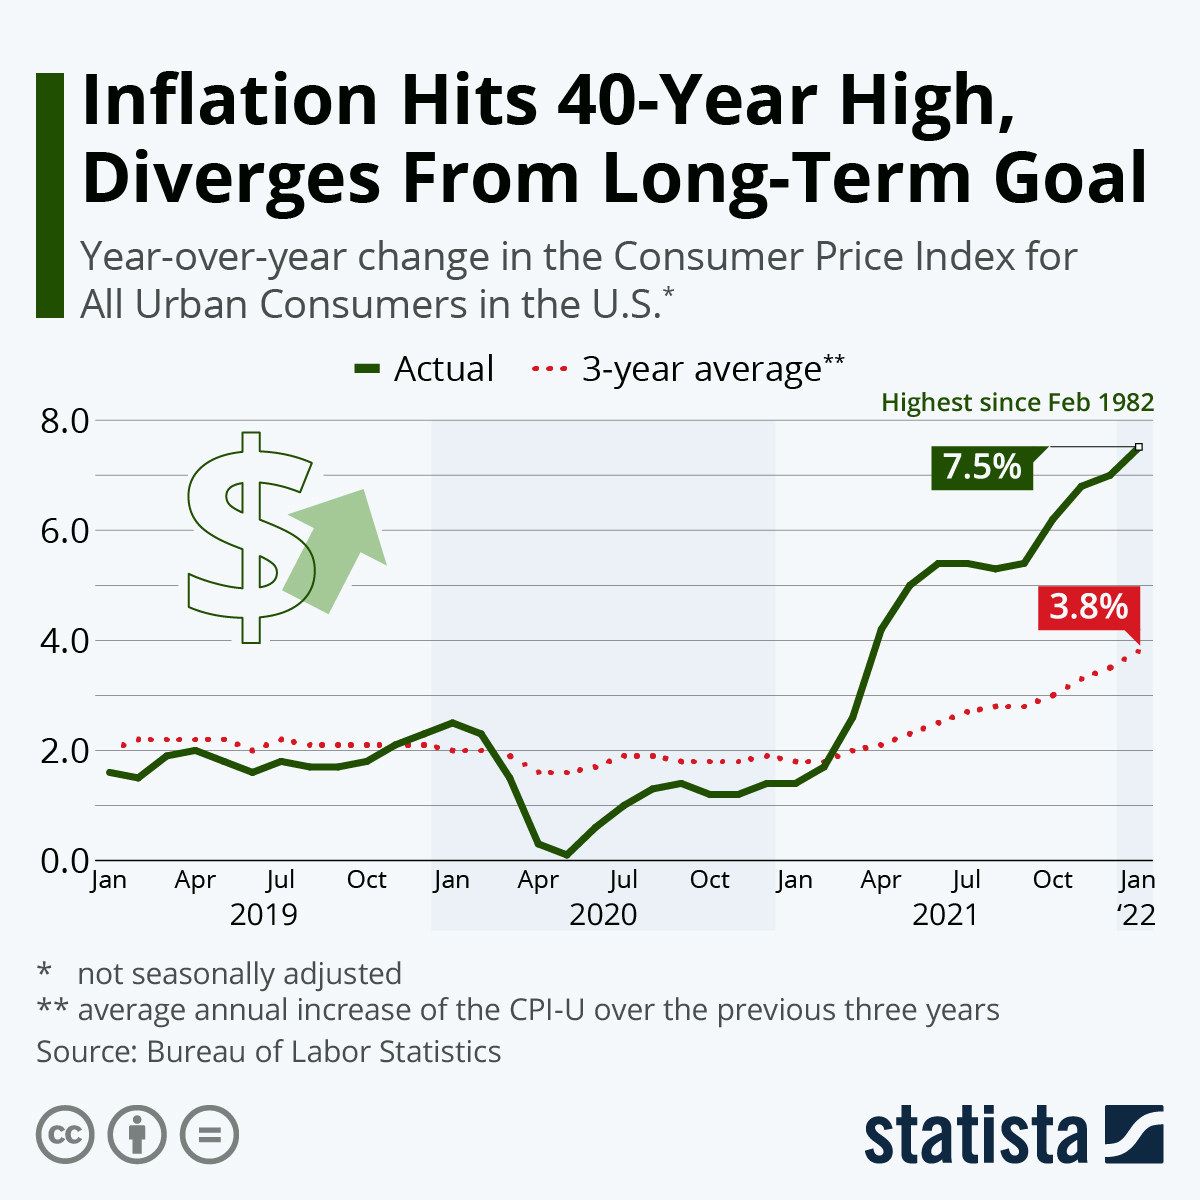 Inflation Hits 40-Year High, Diverges From Long-Term Goal